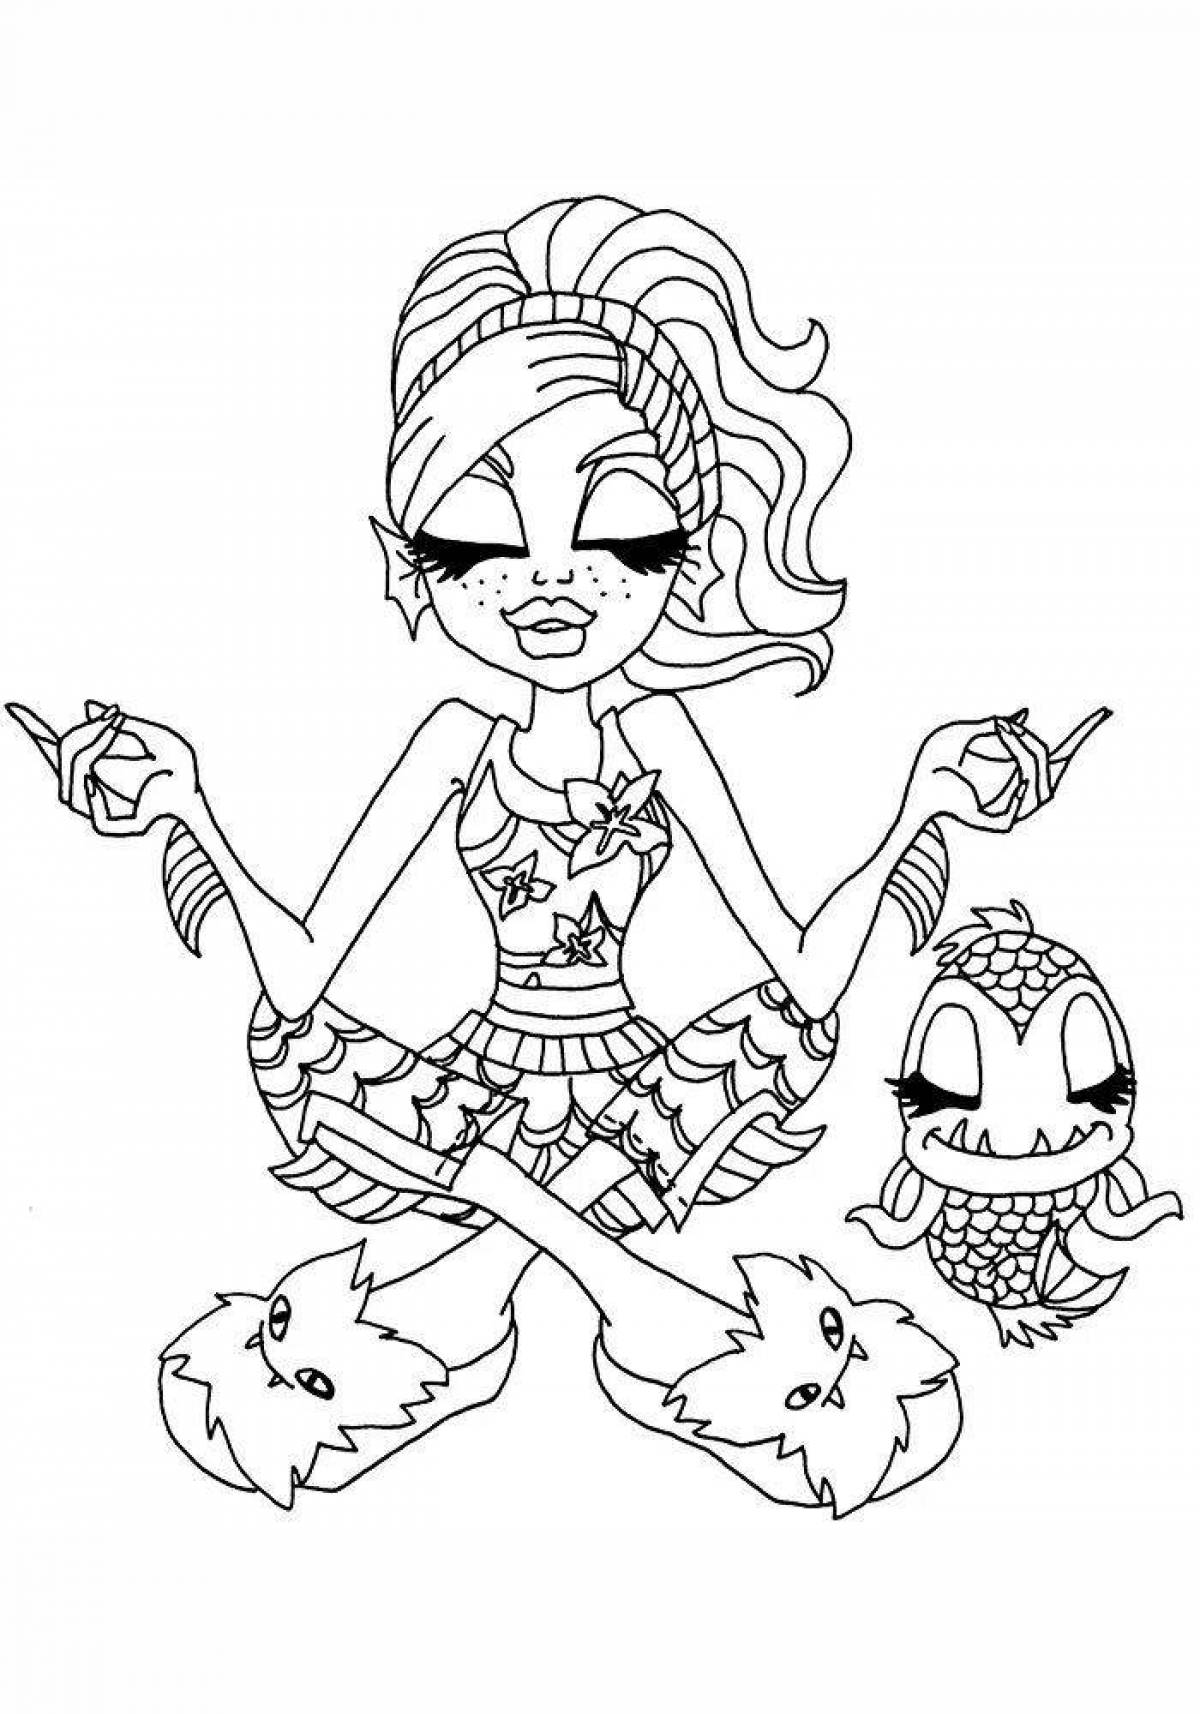 Splendid monster high coloring page